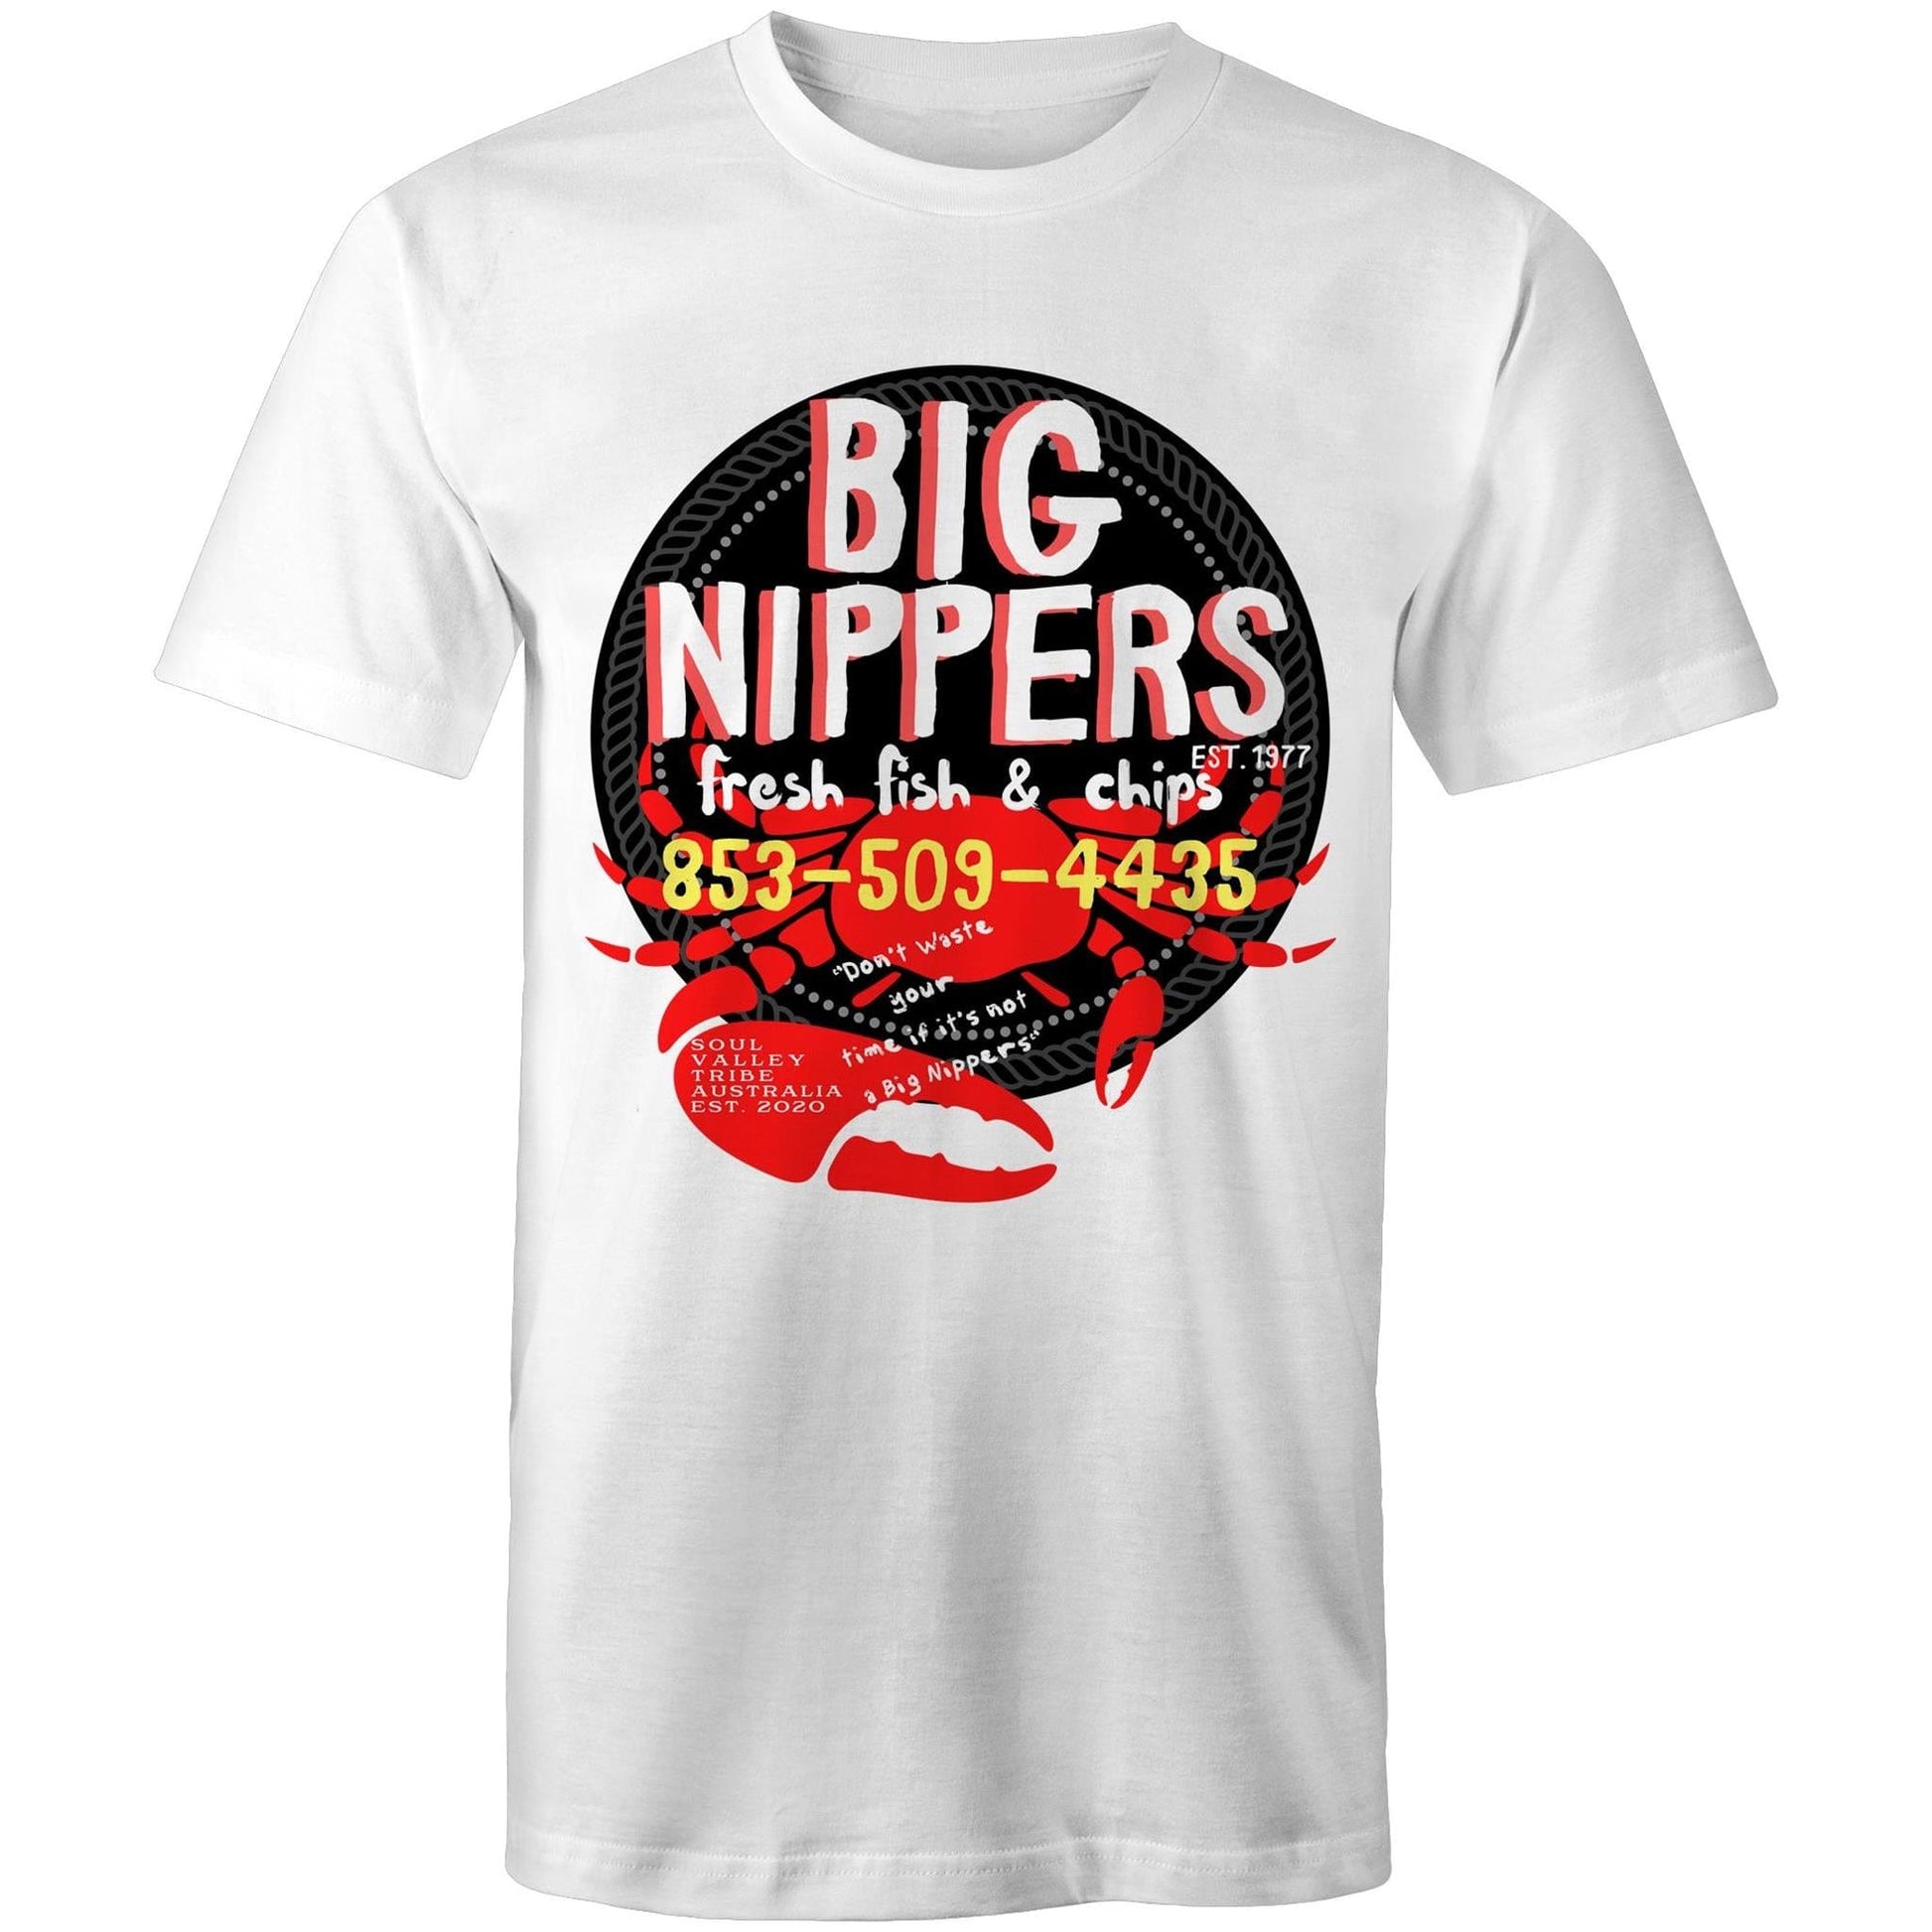 Ogo Merch Big Nippers Fish & Chips Graphic Tee White / Small